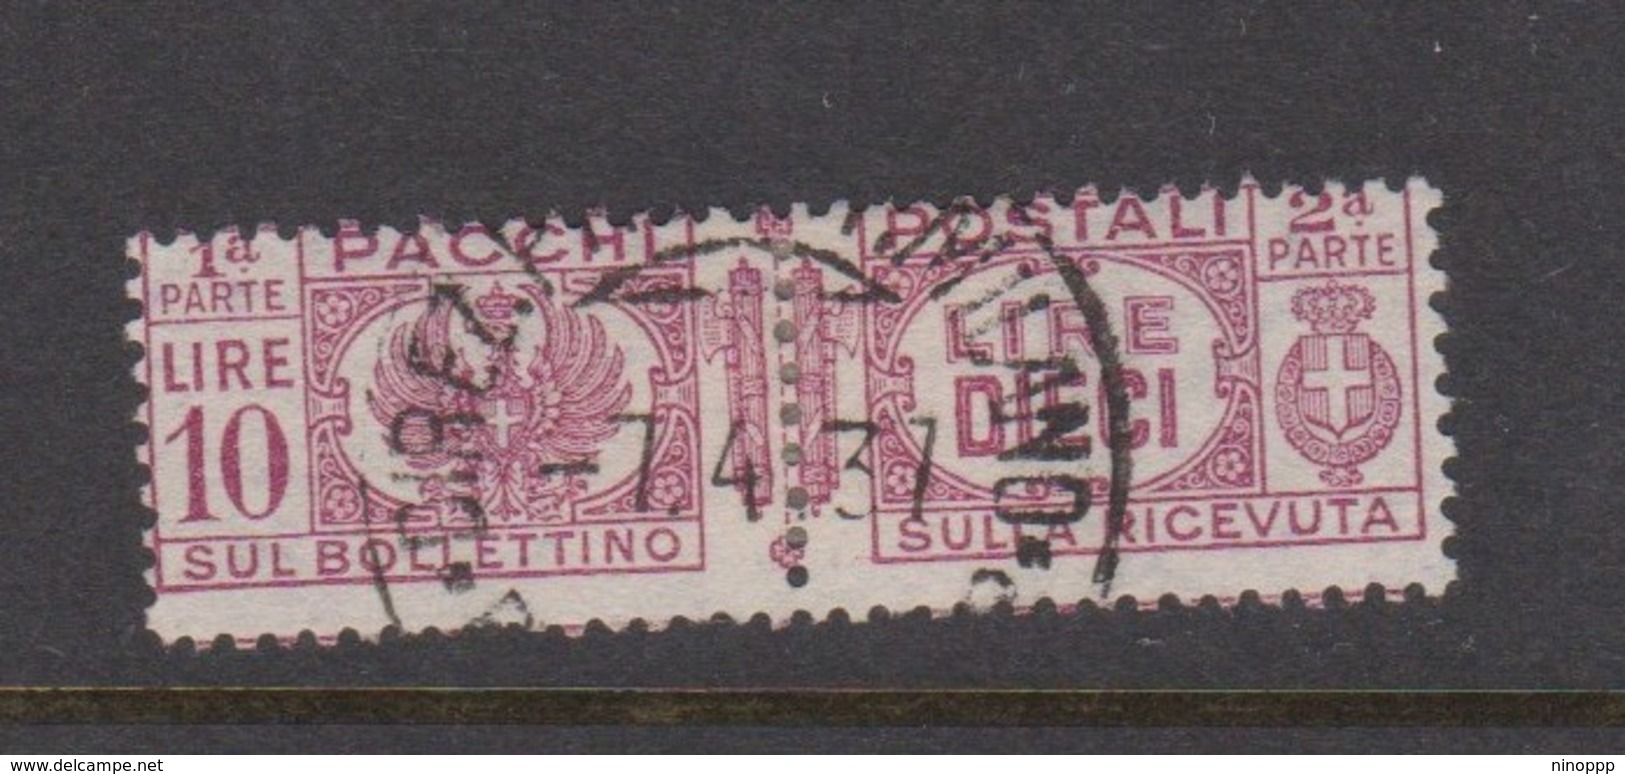 Italy PP 34 1927-32 King Victor Emanuel ,parcel Post, Lire 10 Rose Lilac,Used - Colis-postaux